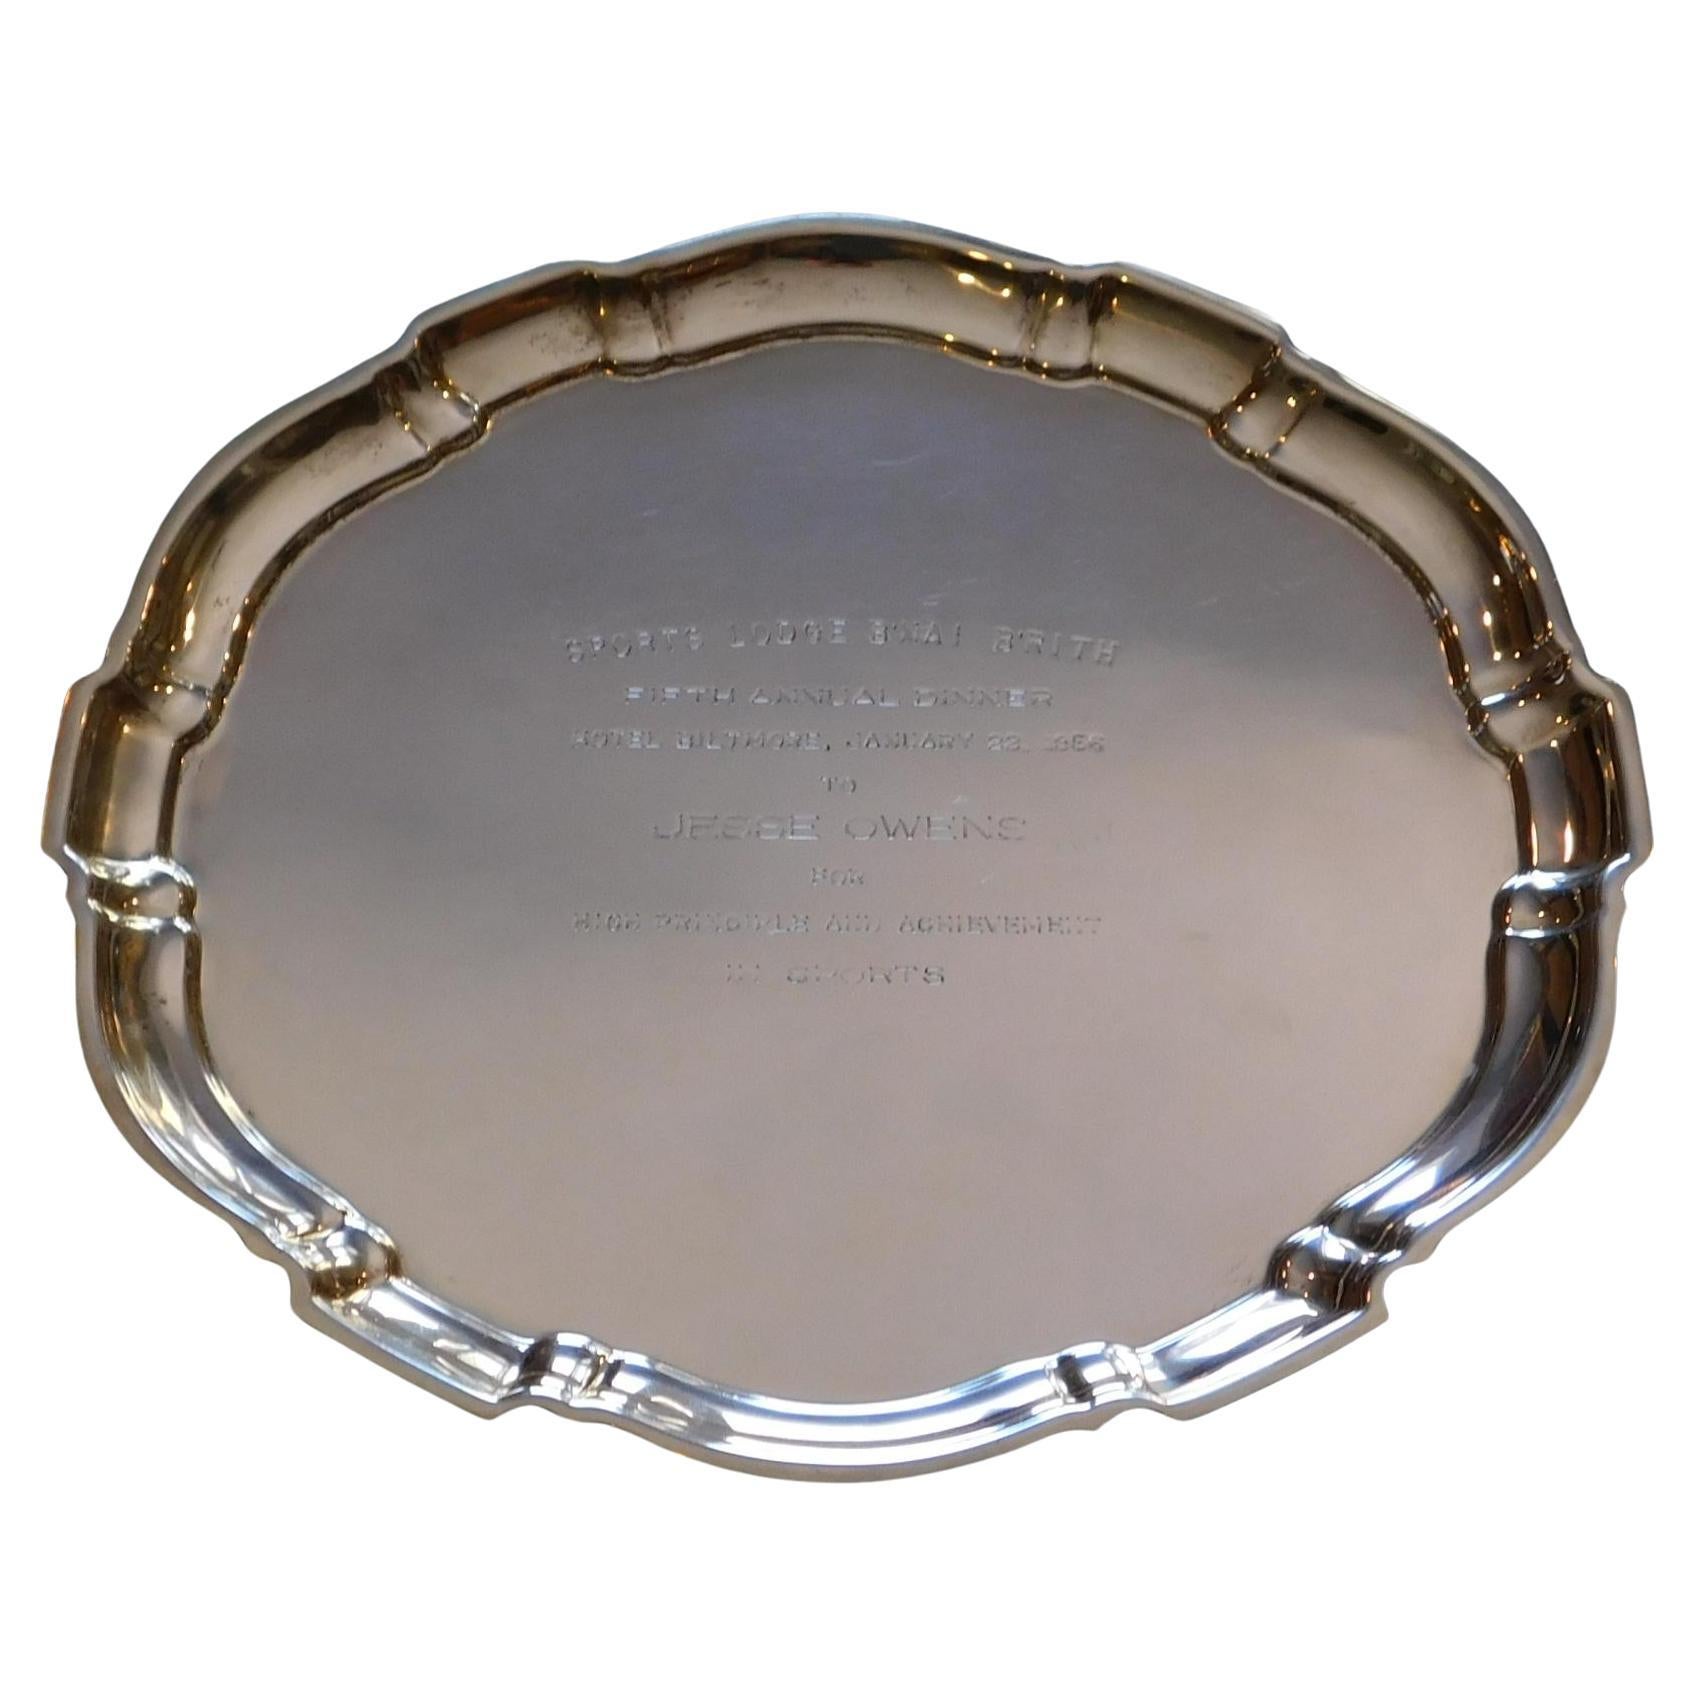 Poole Sterling Silver "Chippendale" Tray - An award to Jesse Owens